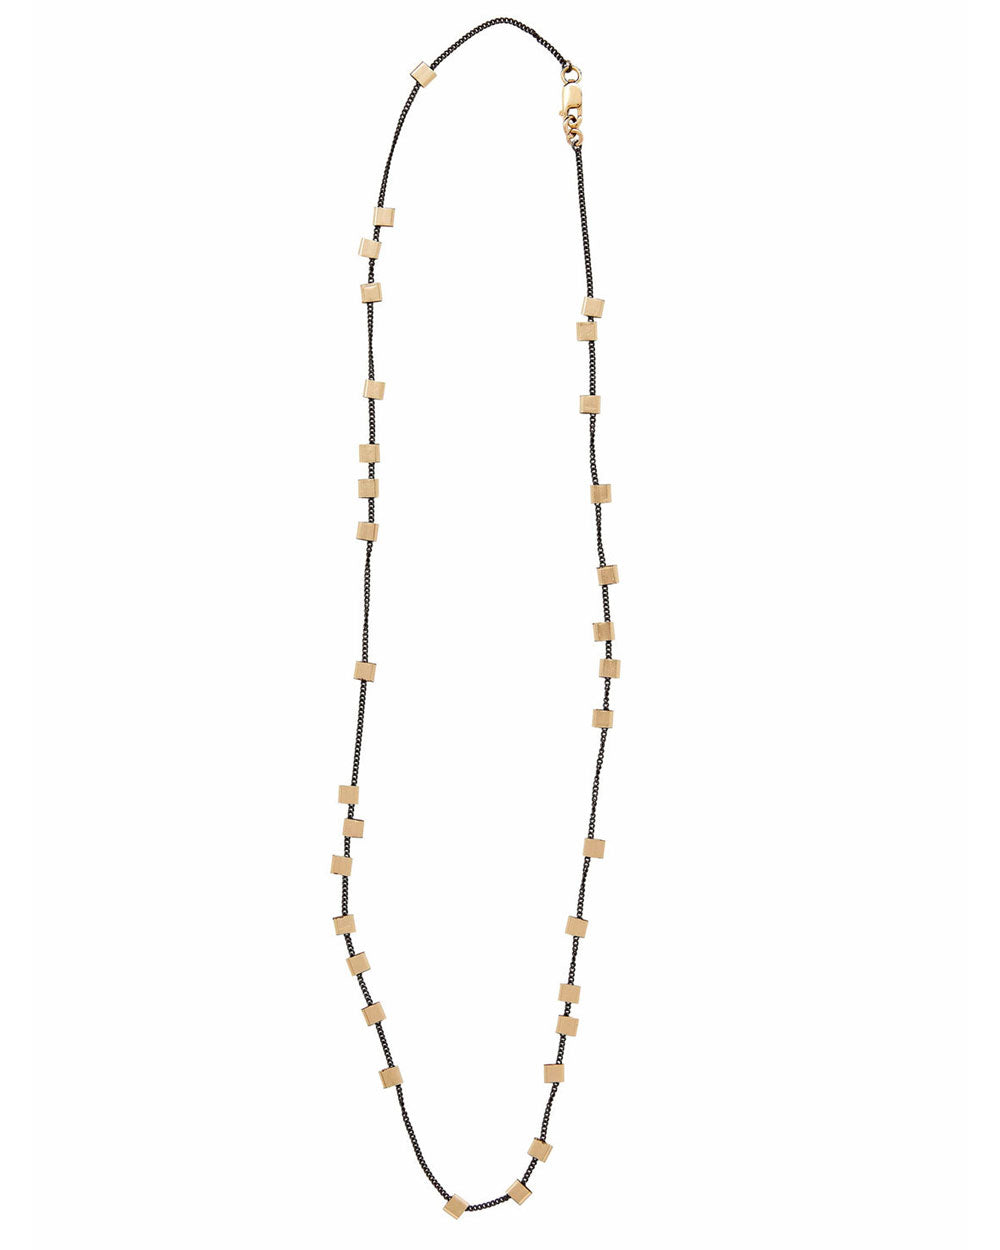 Bertoia Two Tone Station Necklace